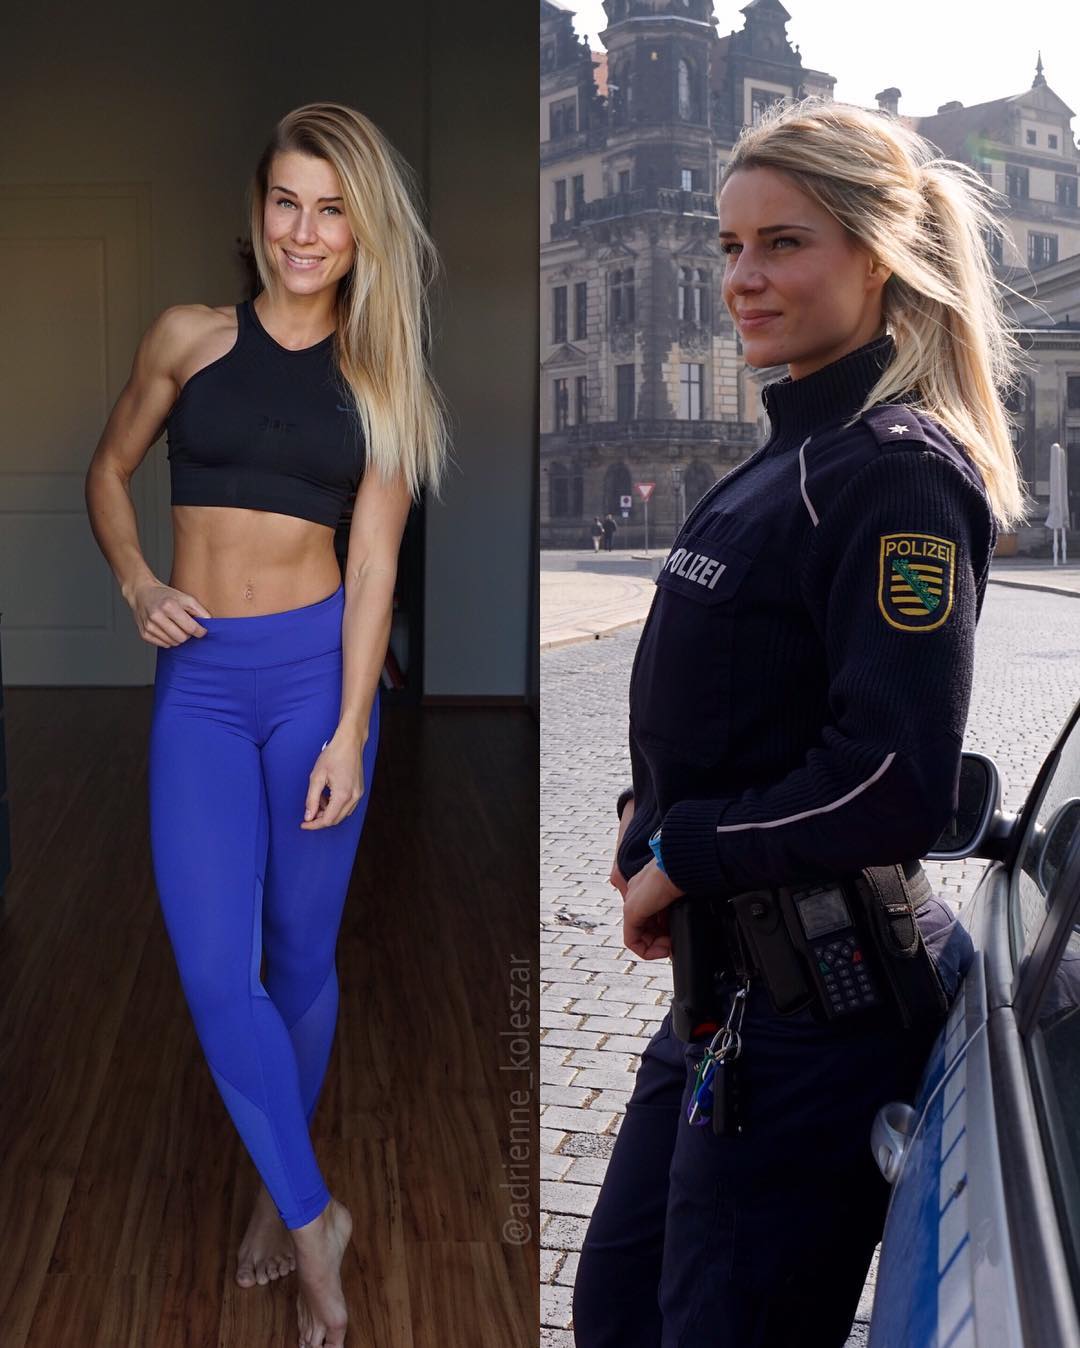 Hottest female cops in the world, hottest police officer female, beautiful police officers, adrienne koleszar